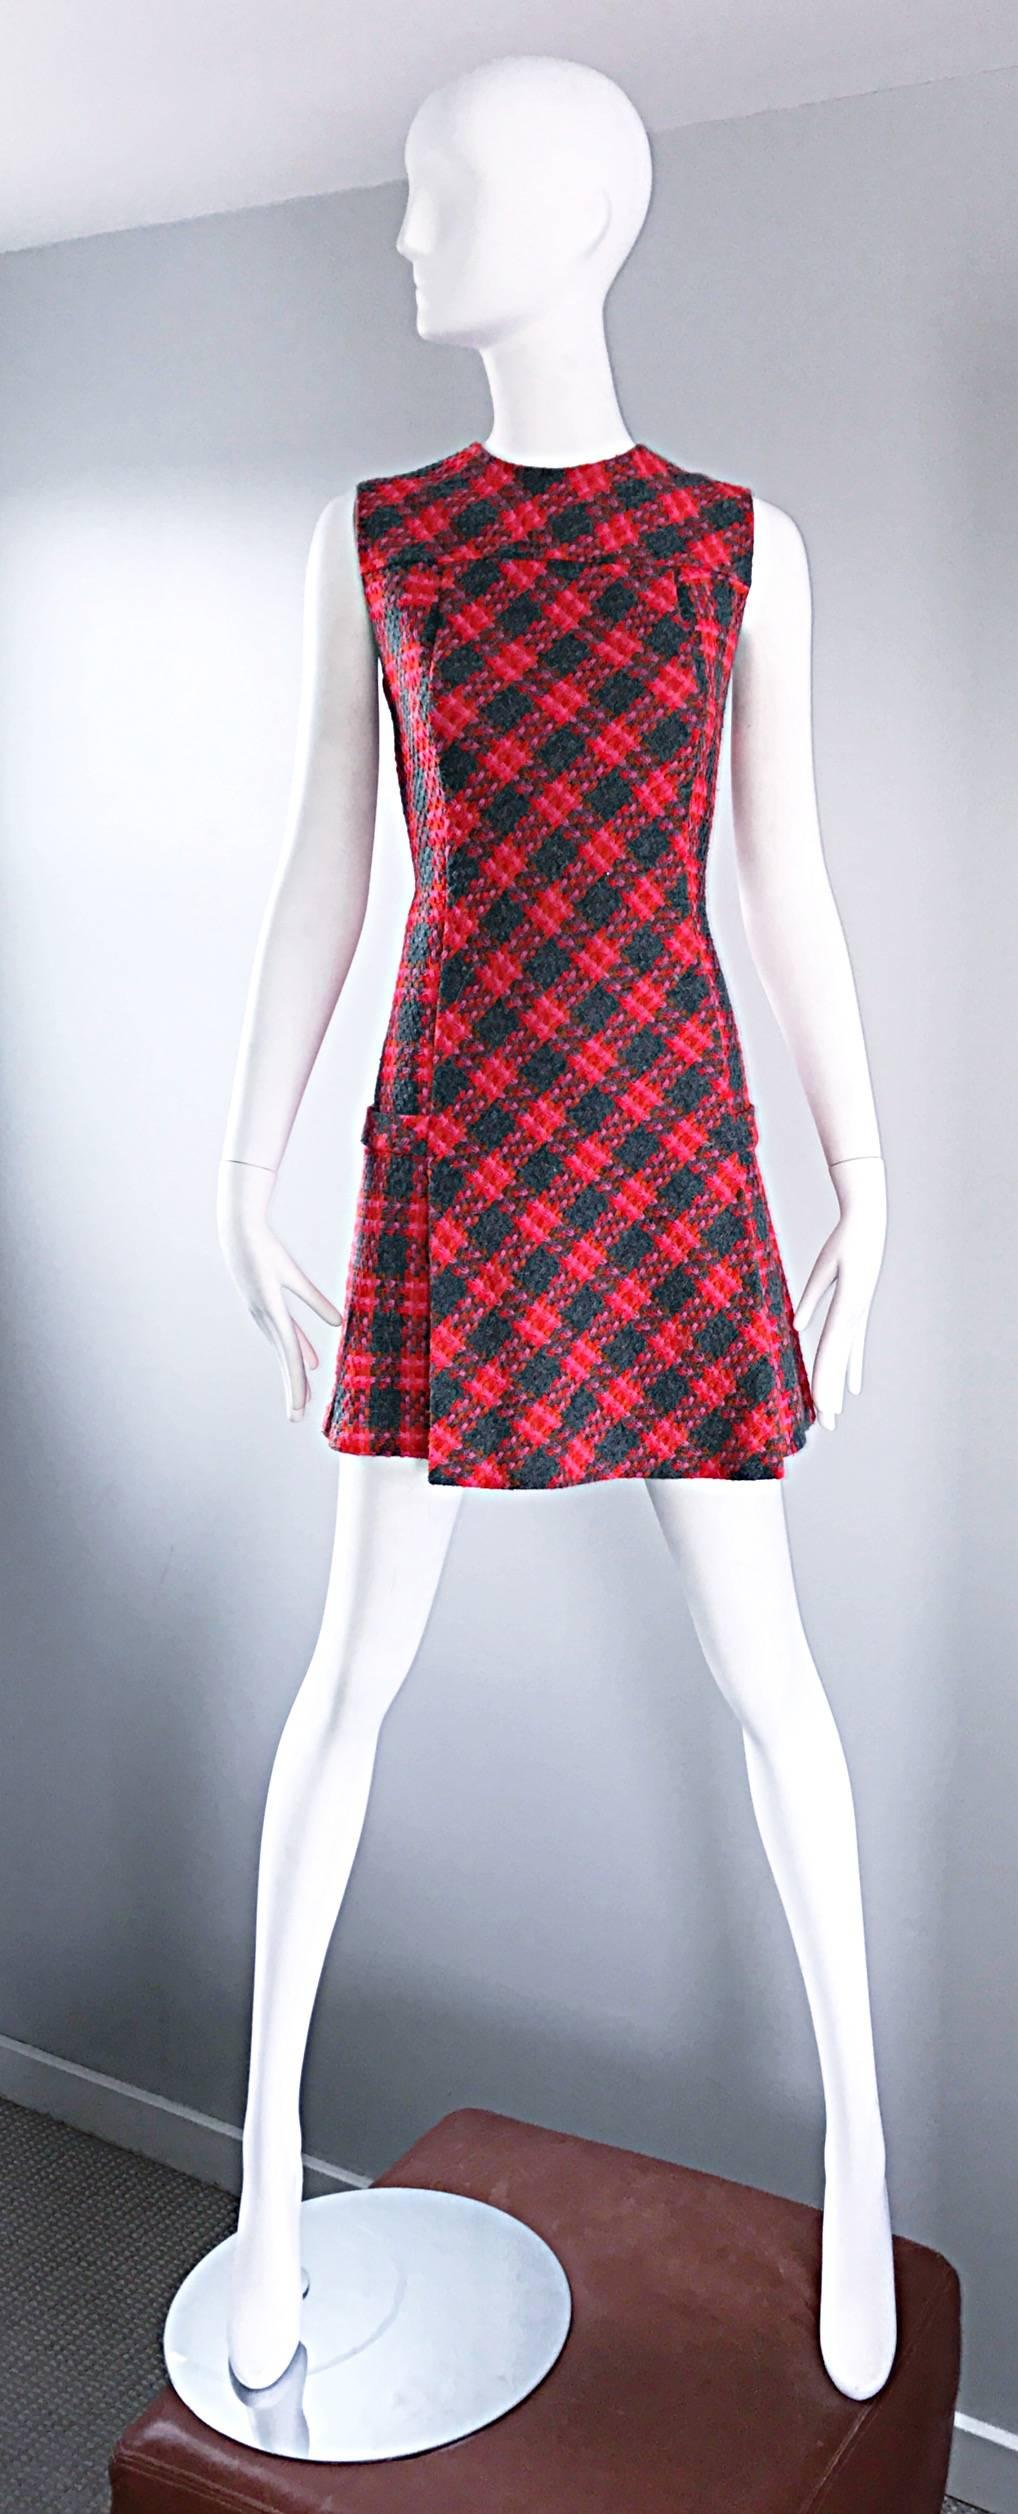 Chic and rare 60s BEAU TIME mod orange, red, pink, and gray plaid A - Line 'trumpet' dress! From the infamous 'Barbie' dressmaker! This label only existed for real life women for a short time, and is very sought after today. Flattering fitted